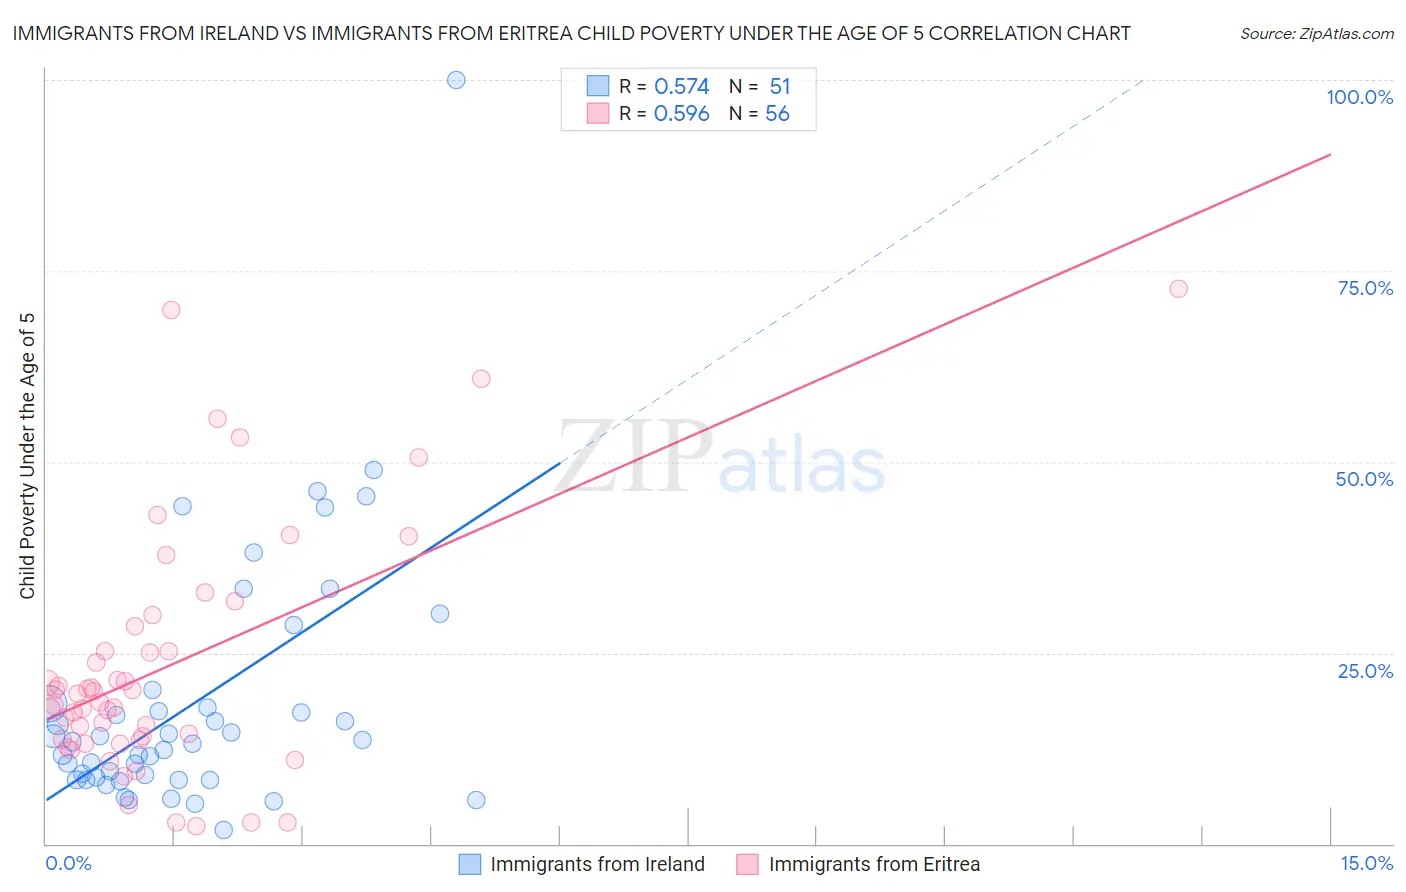 Immigrants from Ireland vs Immigrants from Eritrea Child Poverty Under the Age of 5